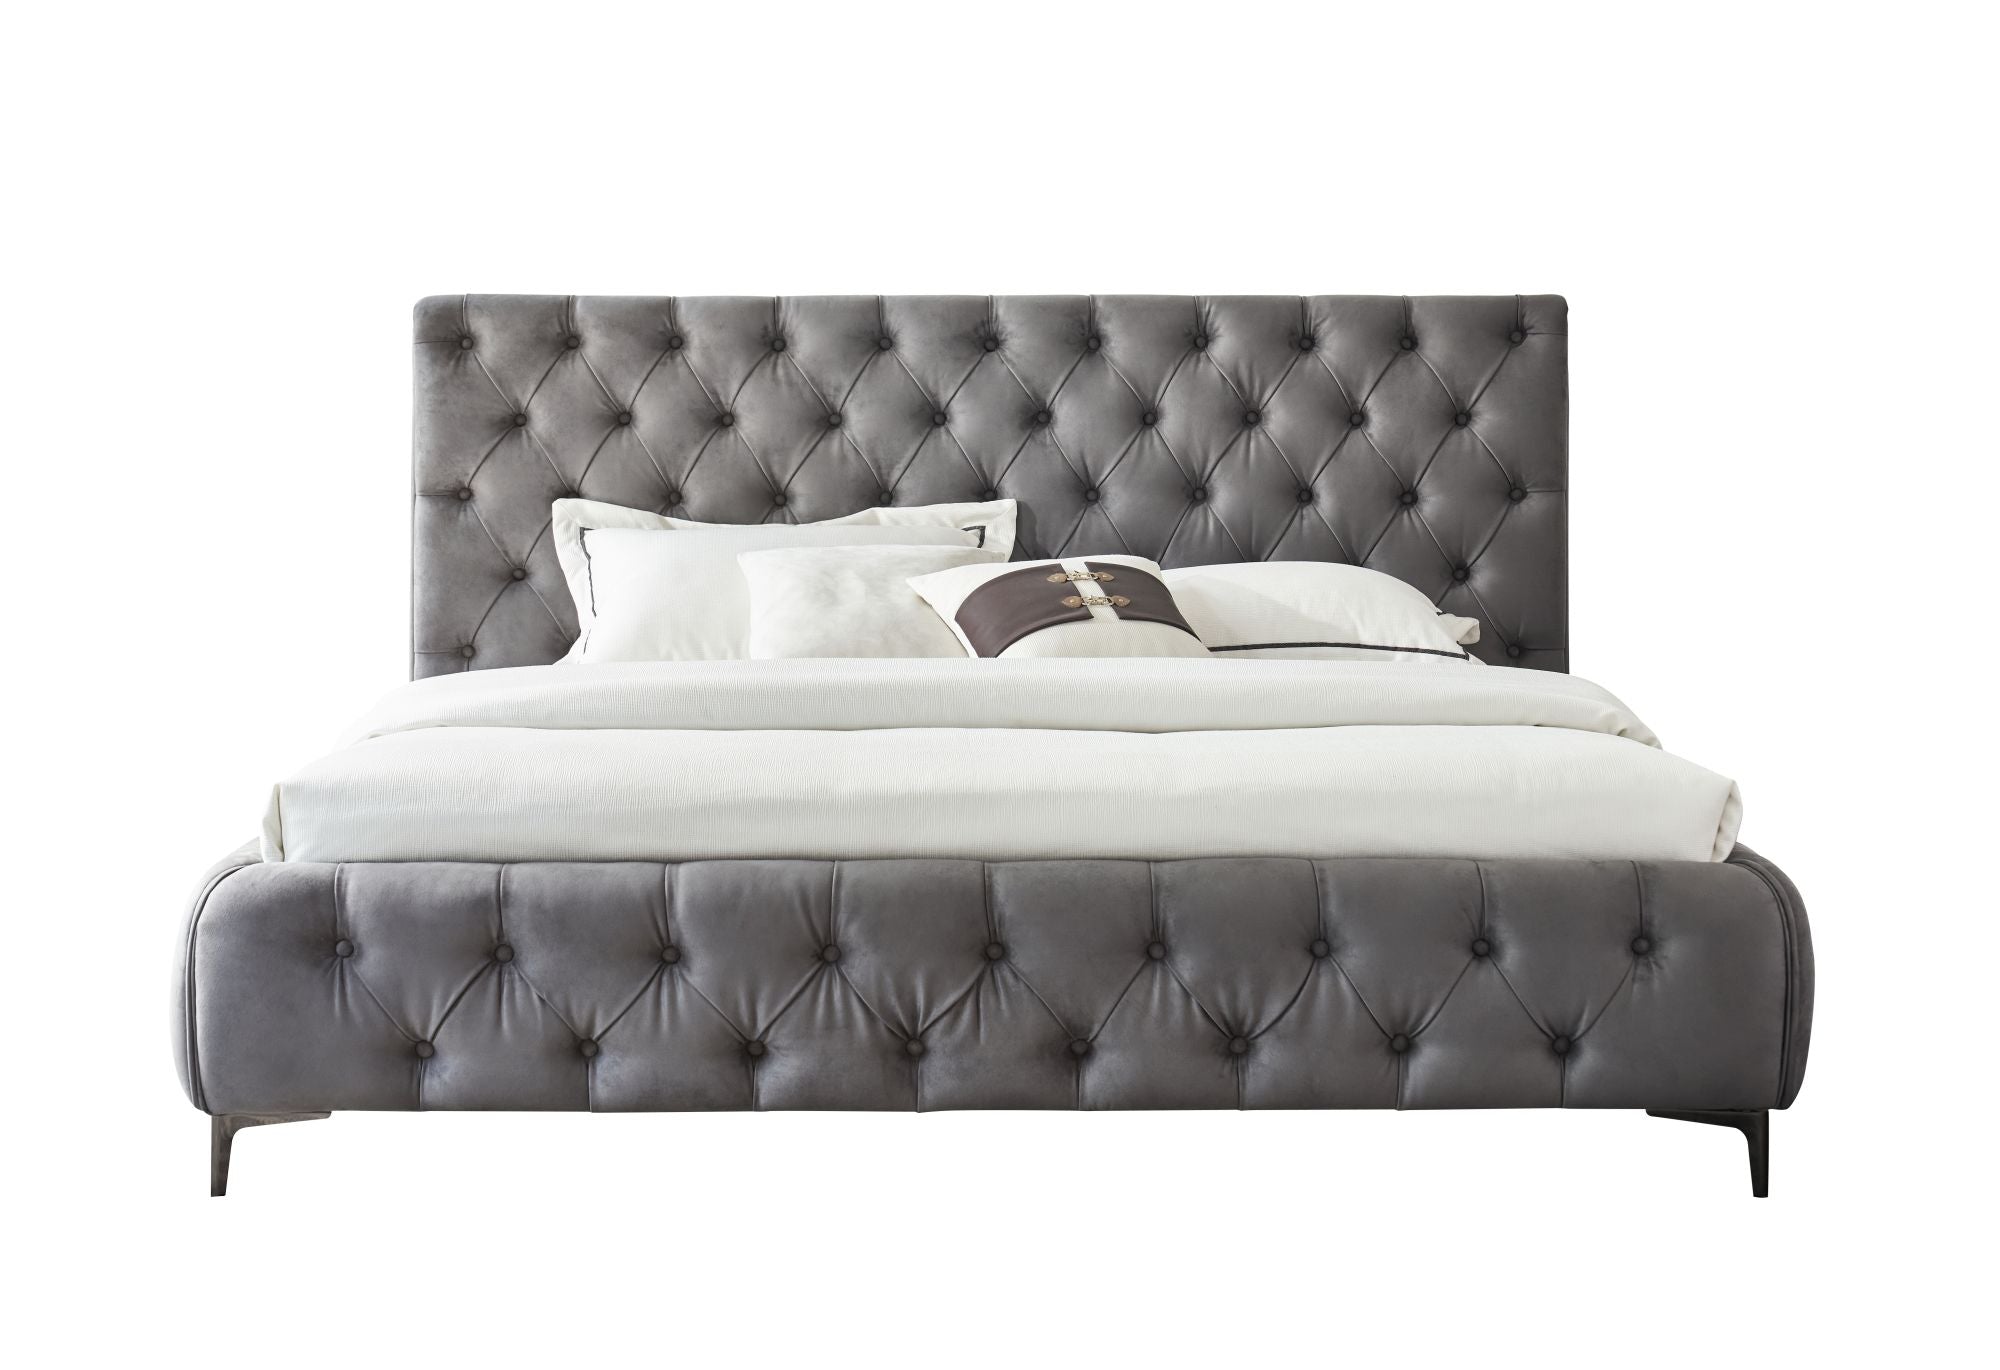 Royal bedframe in Grey straight on view white background 